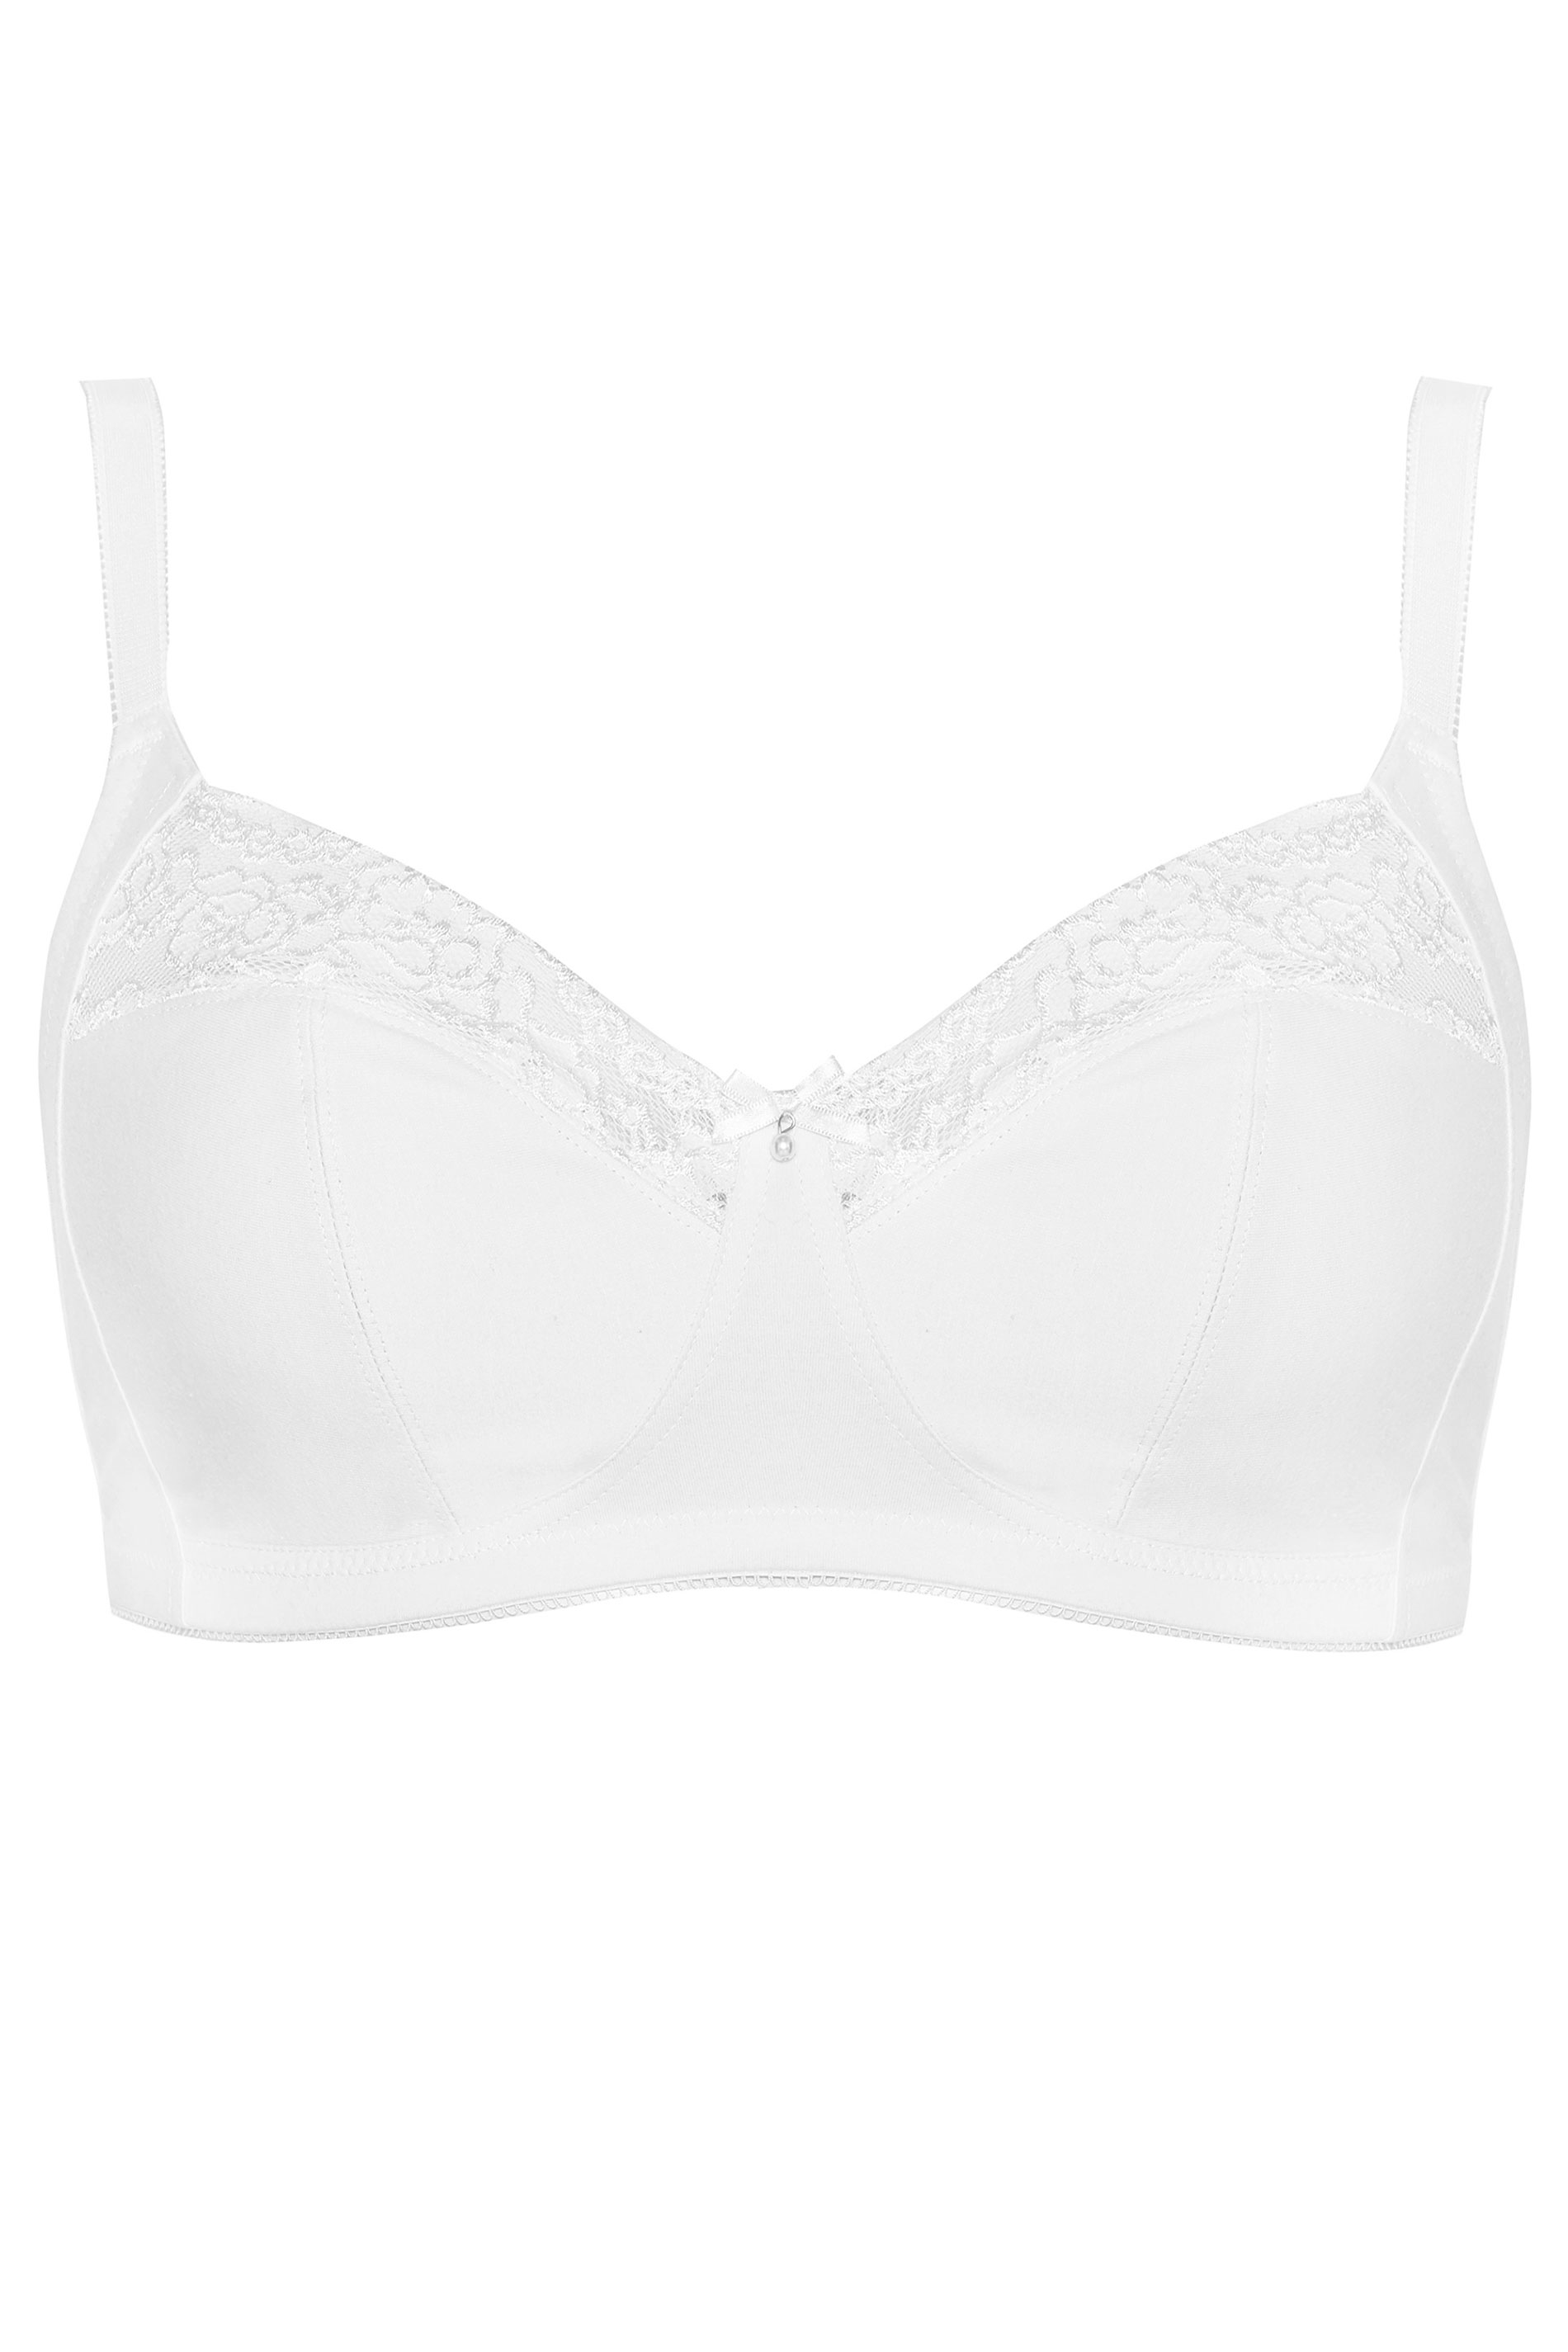 Buy Nude/White Non Pad Full Cup Bras 2 Pack from the Next UK online shop